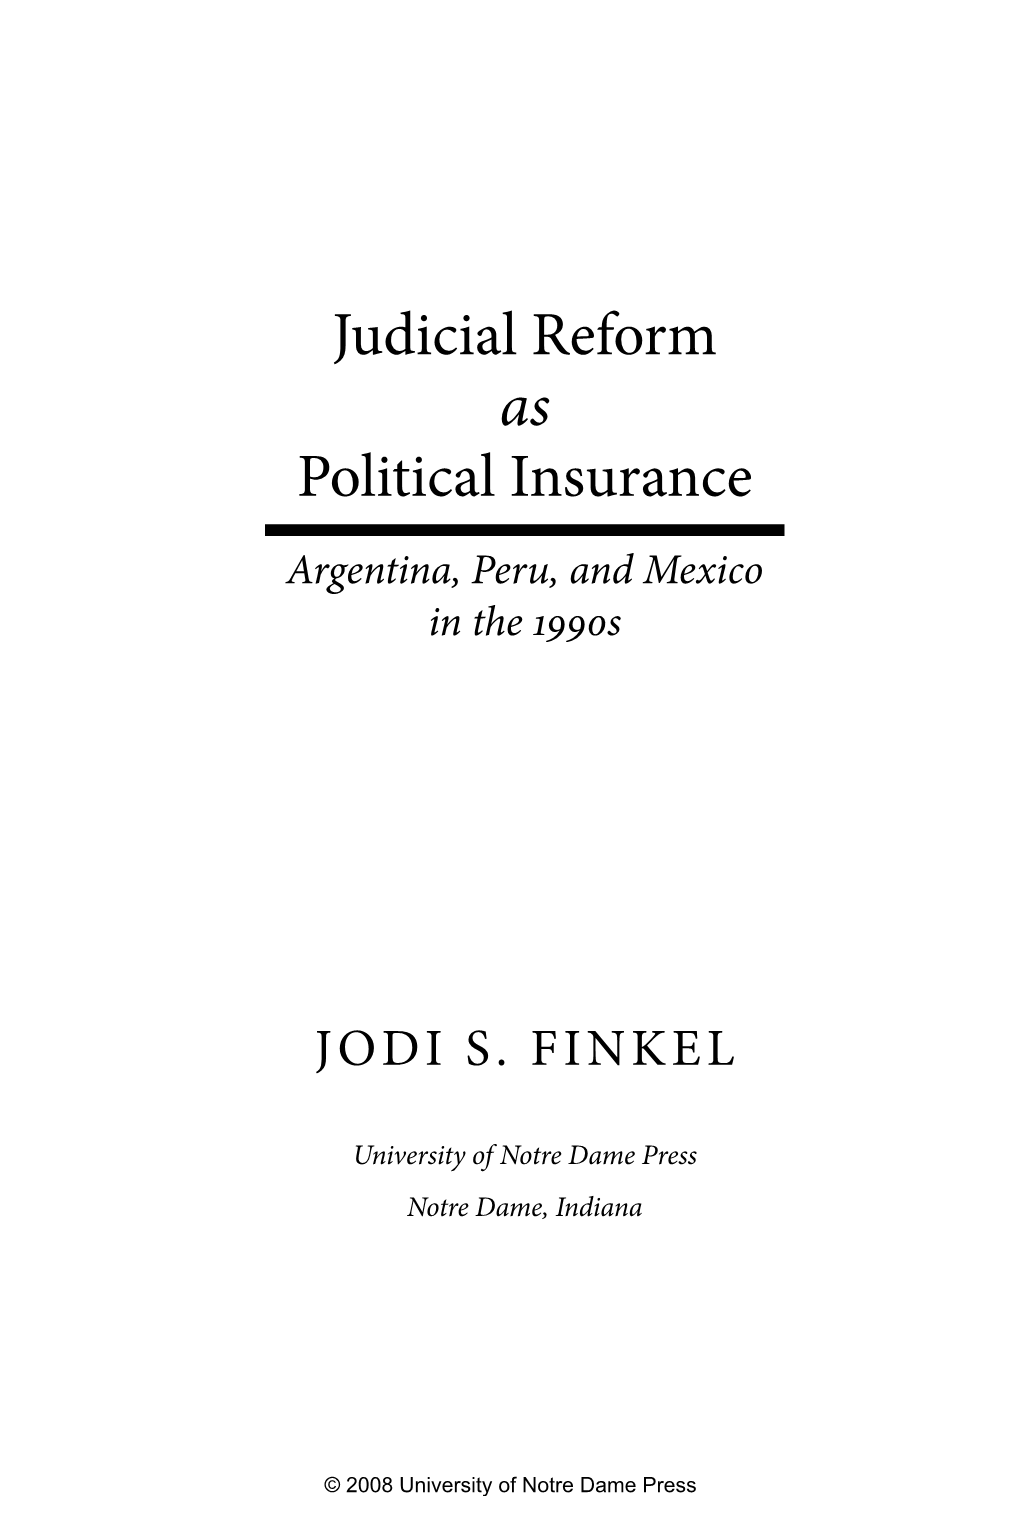 Judicial Reform As Political Insurance Argentina, Peru, and Mexico in the 1990S